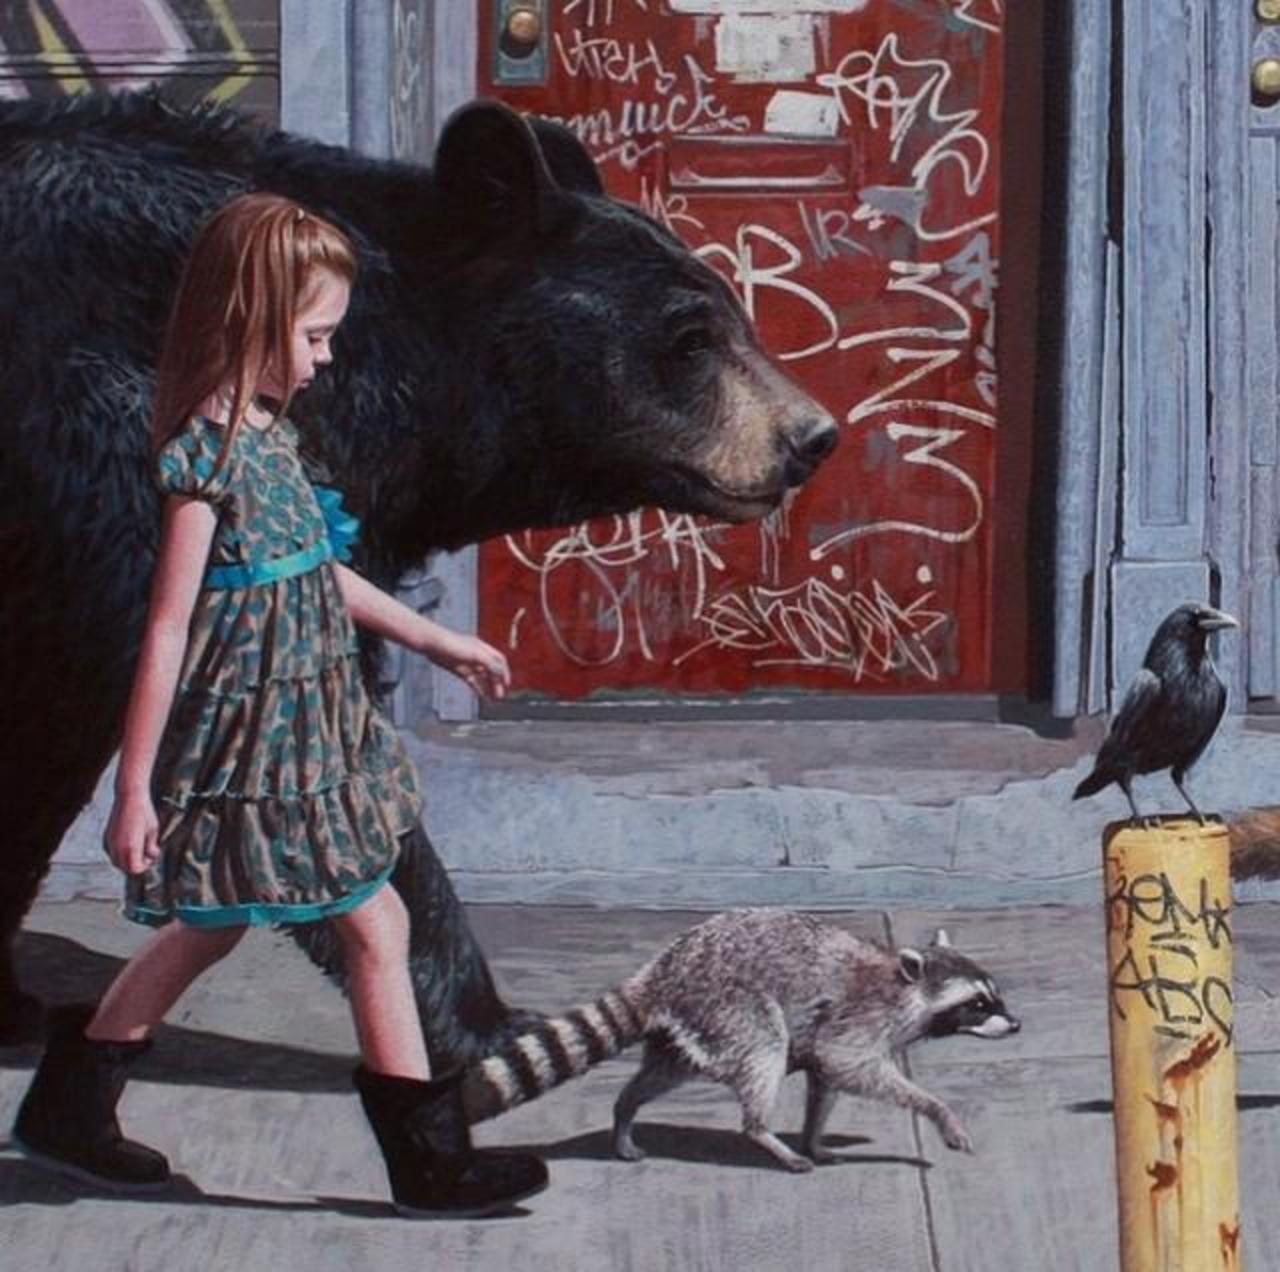 Hyperrealistic nature in Street Art scene painted oil on panel by Kevin Peterson 

#art #arte #graffiti #streetart http://t.co/ZILbmkw9M6